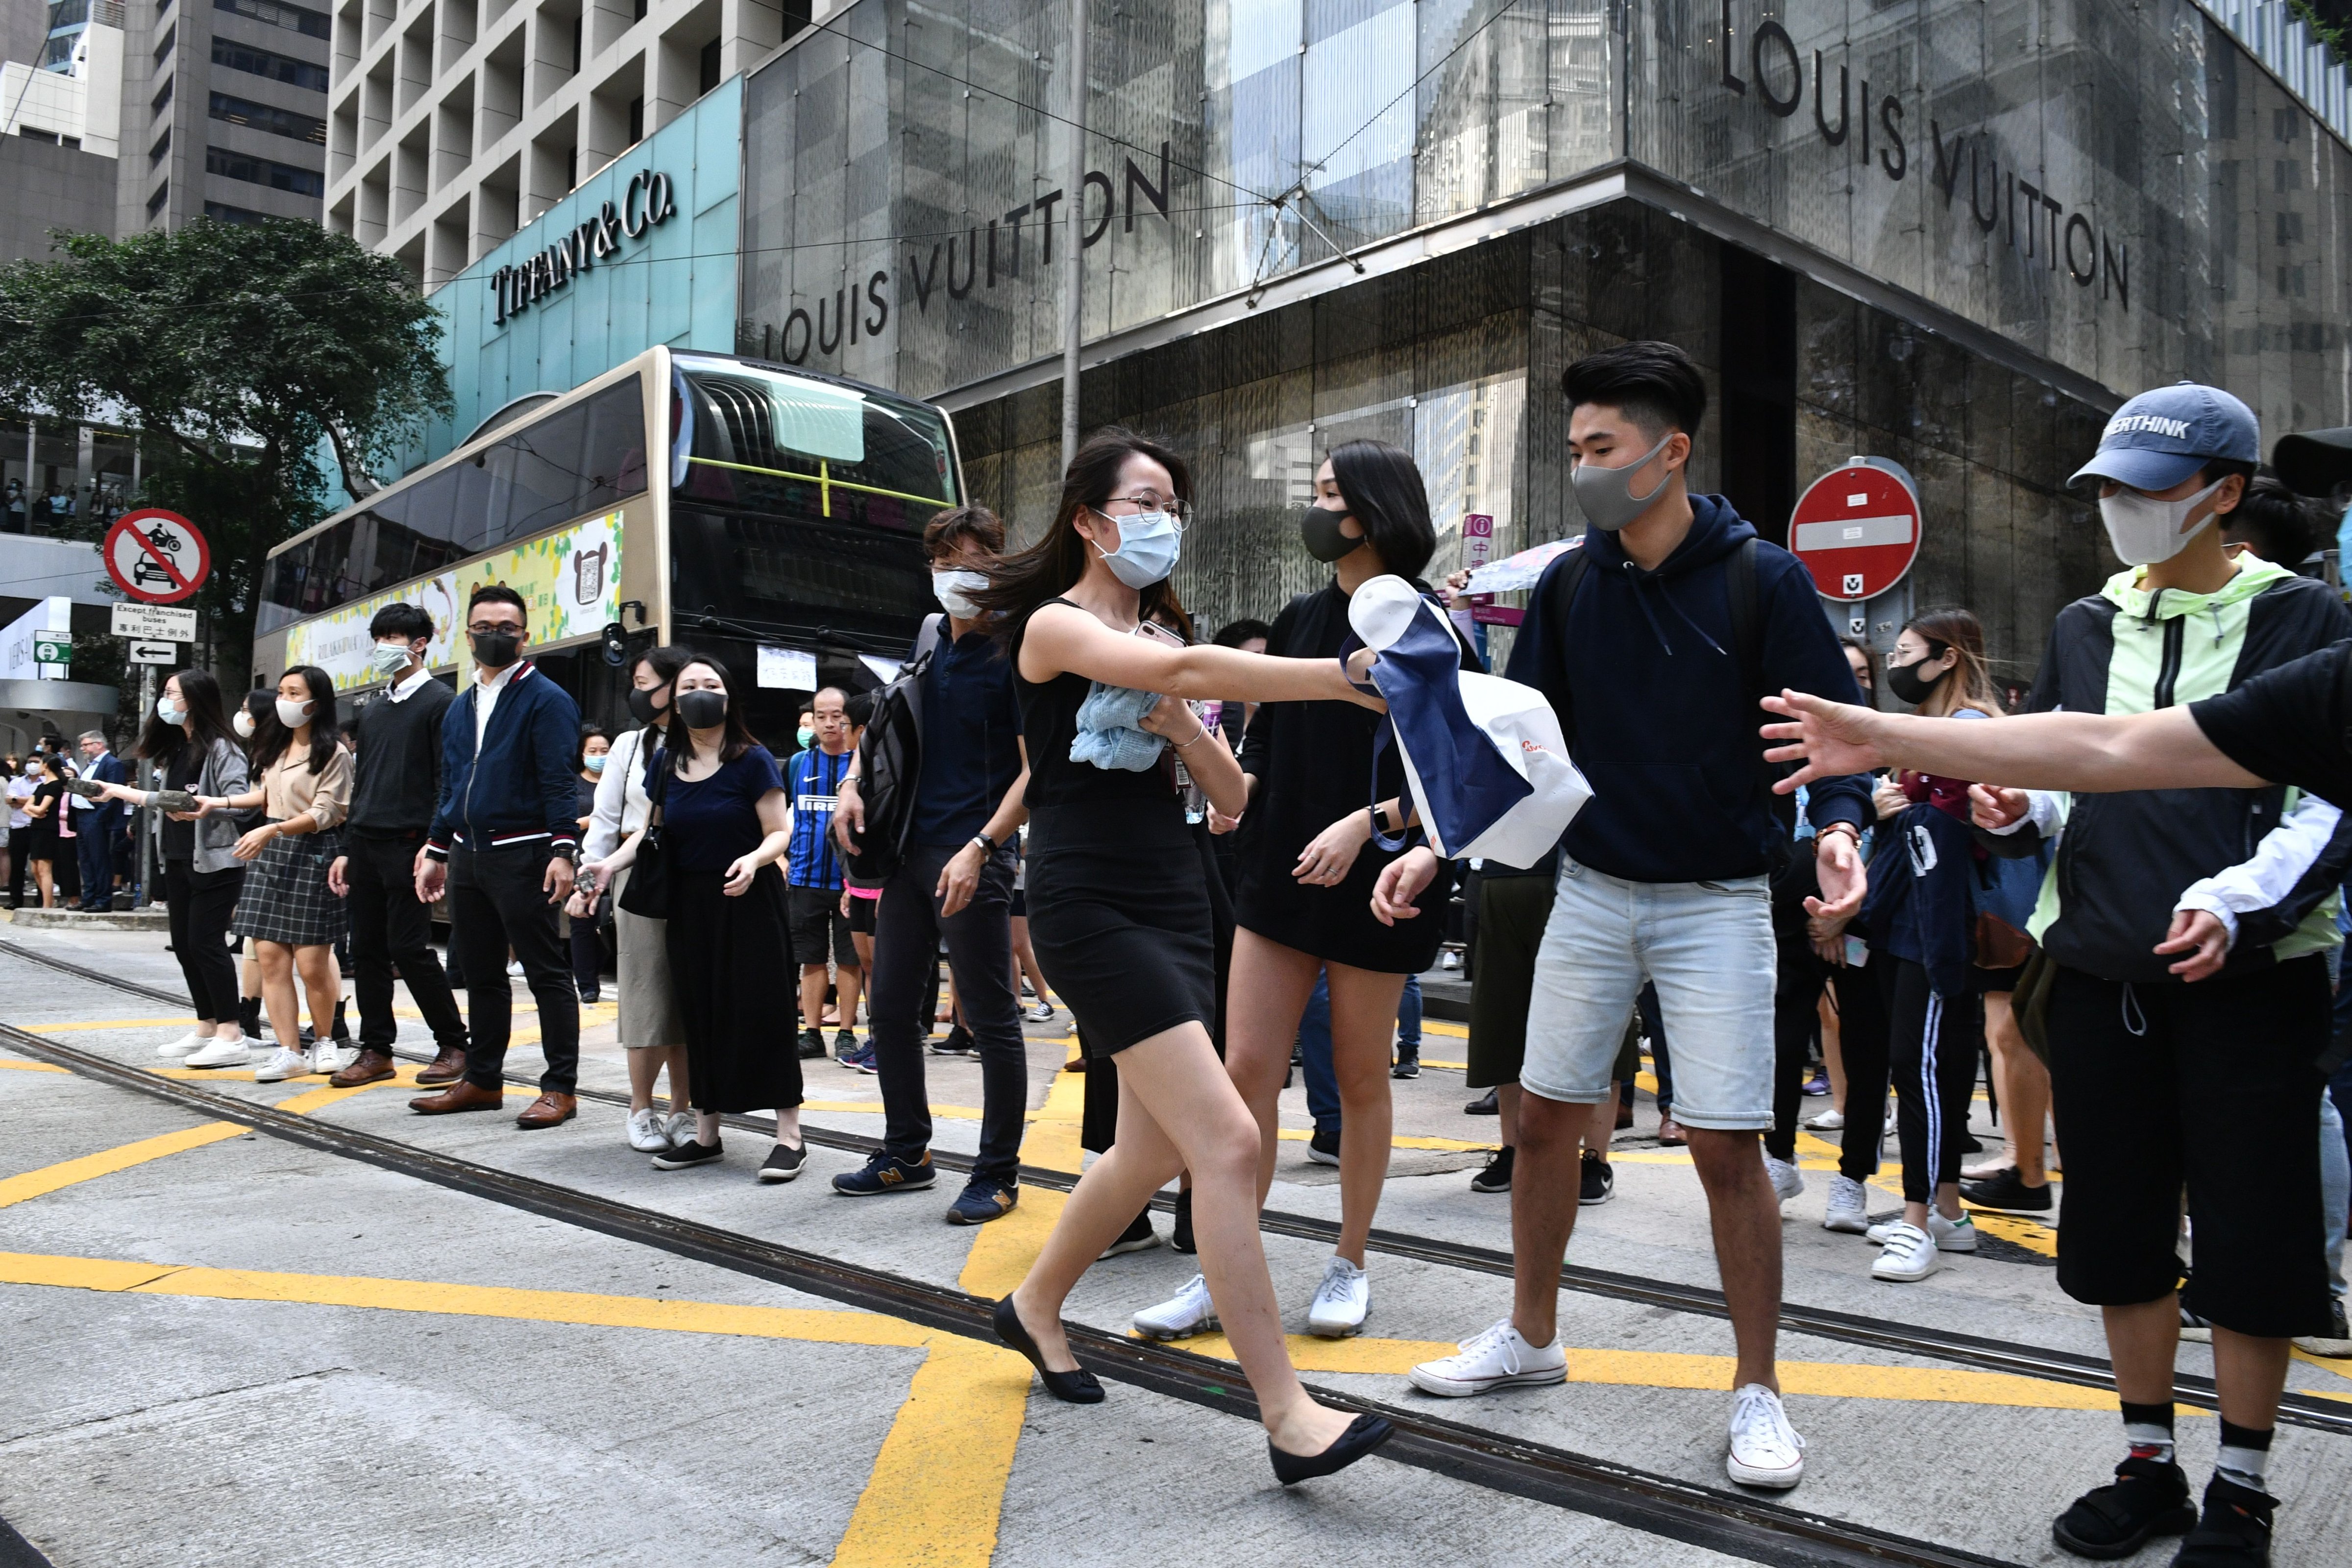 Office workers and pro-democracy protesters form a human chain to pass bricks during a demonstration in Central in Hong Kong on November 12, 2019. (ANTHONY WALLACE—AFP via Getty Images)